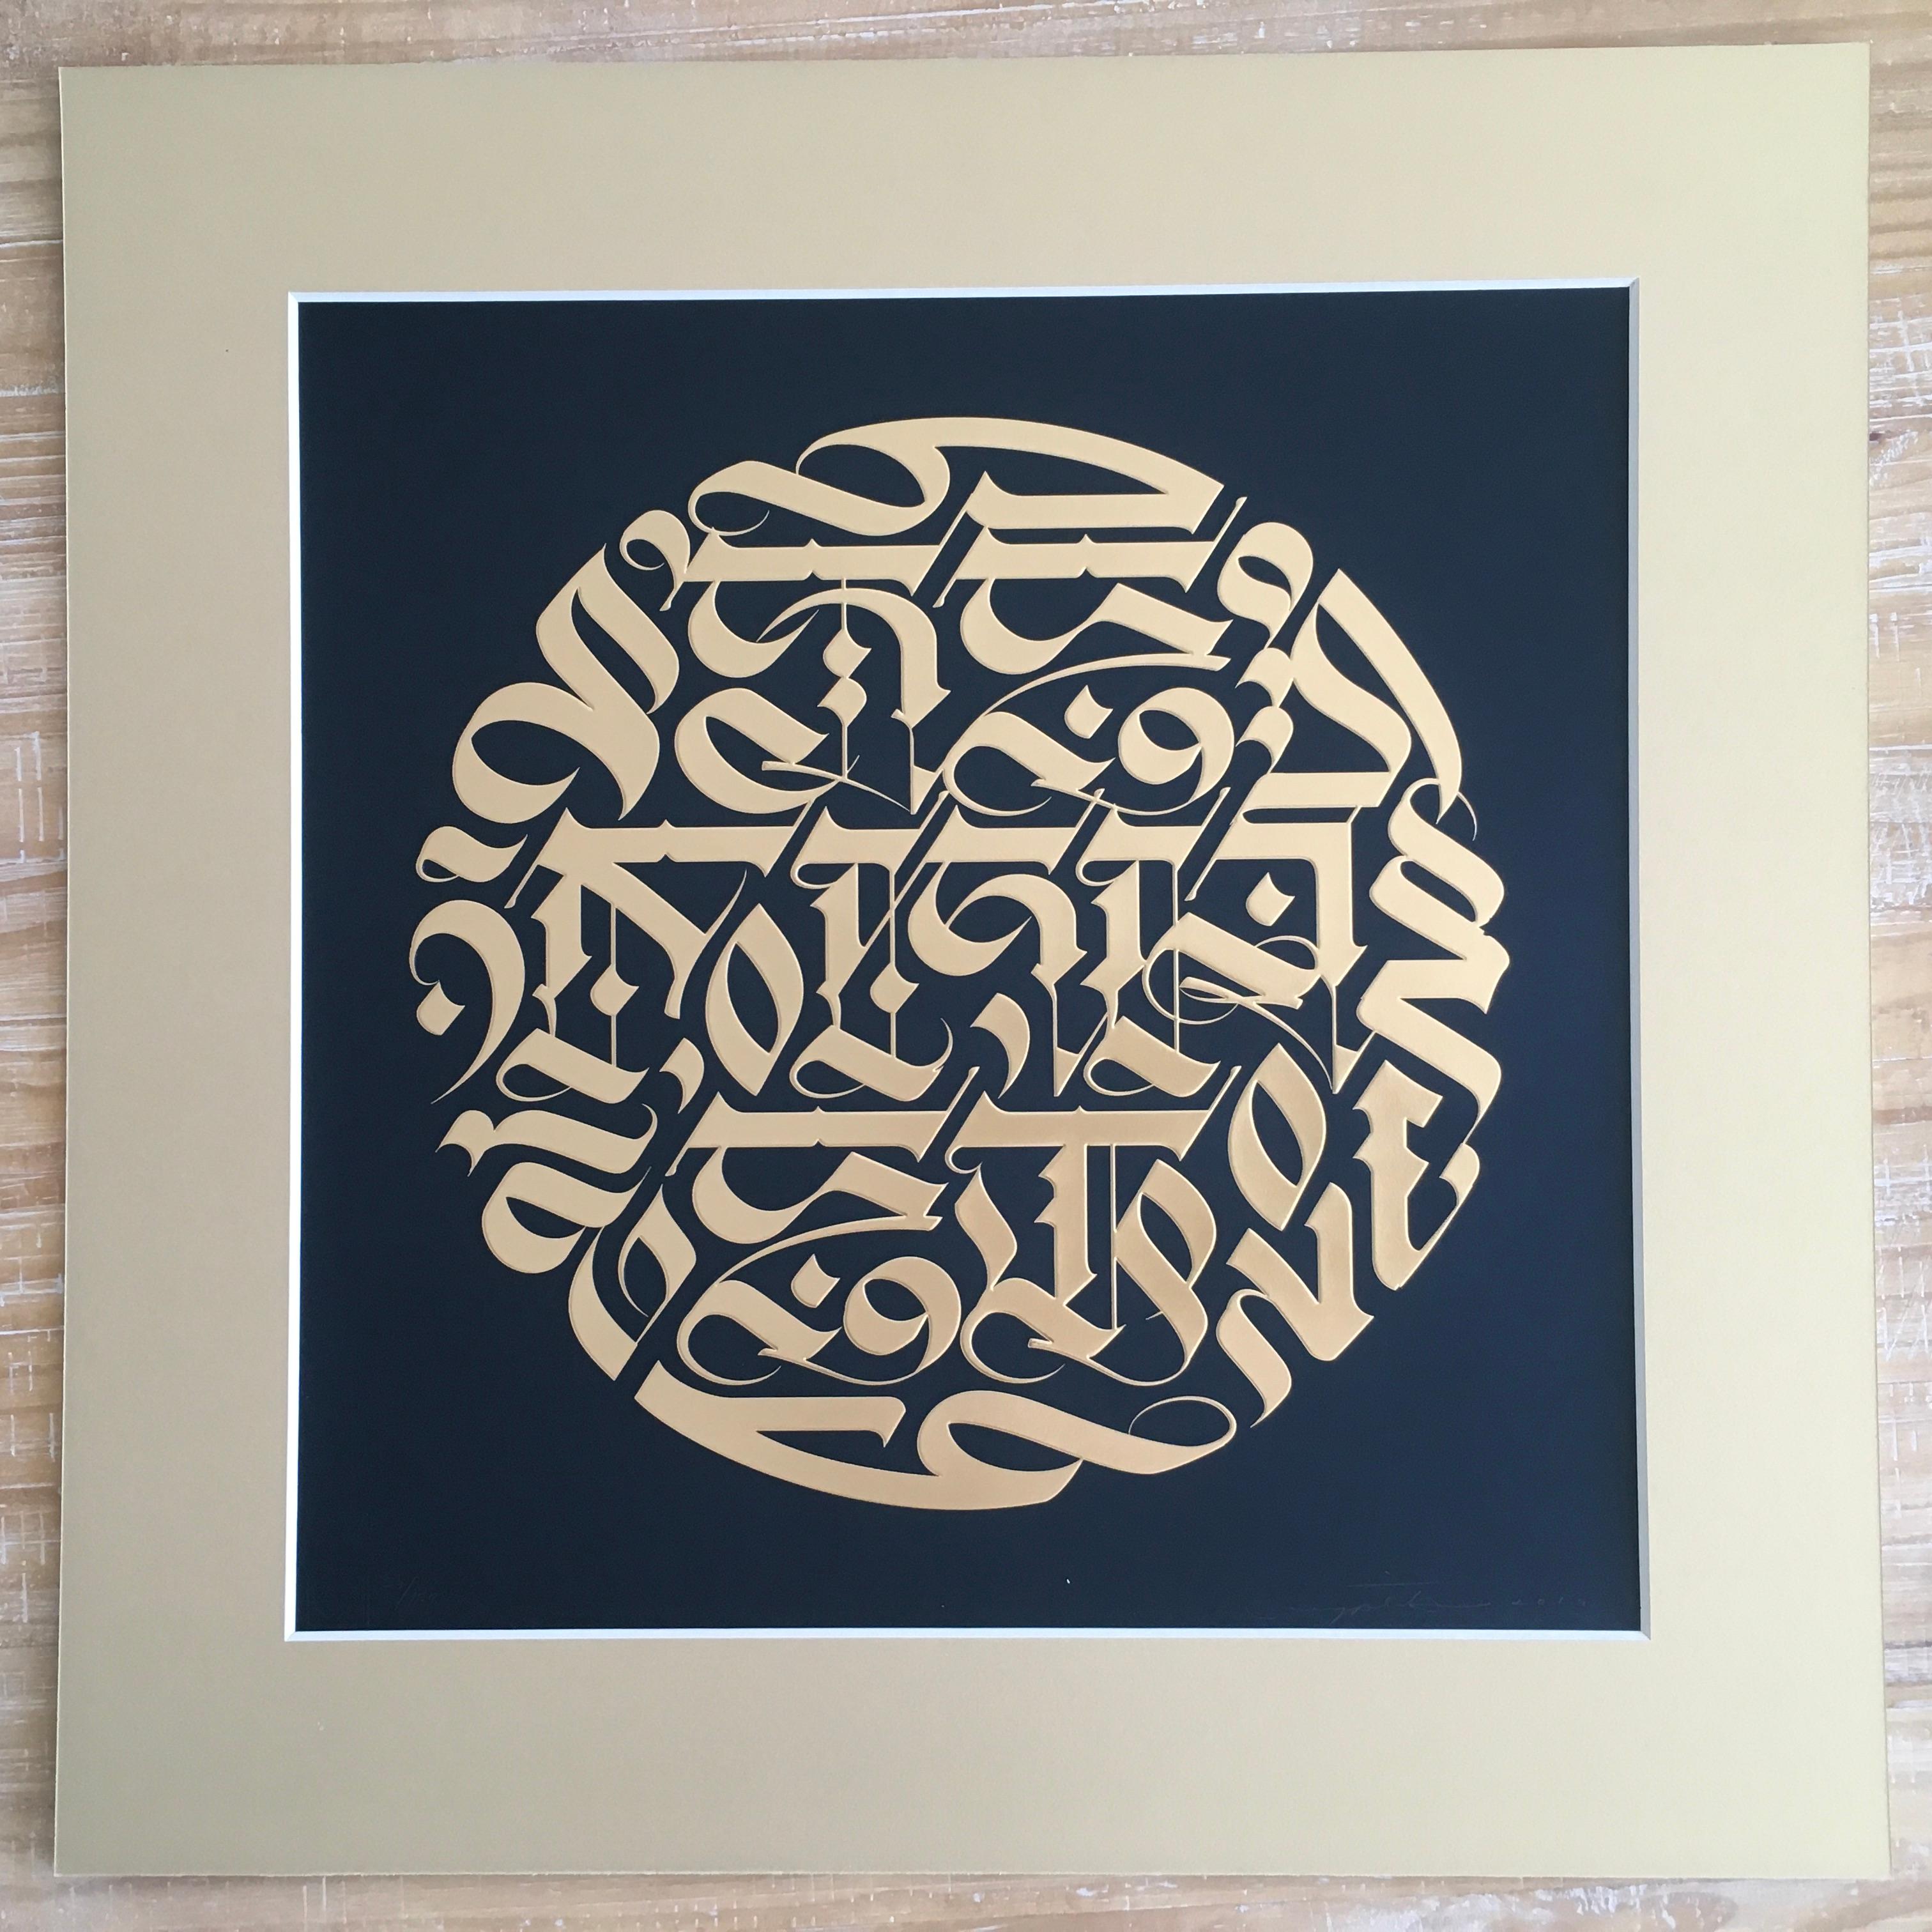 „Desert Moon“ by Cryptik 
Embossed Gold Foil Stamping on 350 GSM Epic Black Cover
Size 40 × 40 cm
Signed and numbered (57/150), in pencil along lower edge
 
Cryptik is a Los Angeles based artist who creates from a palette of wonder, where all